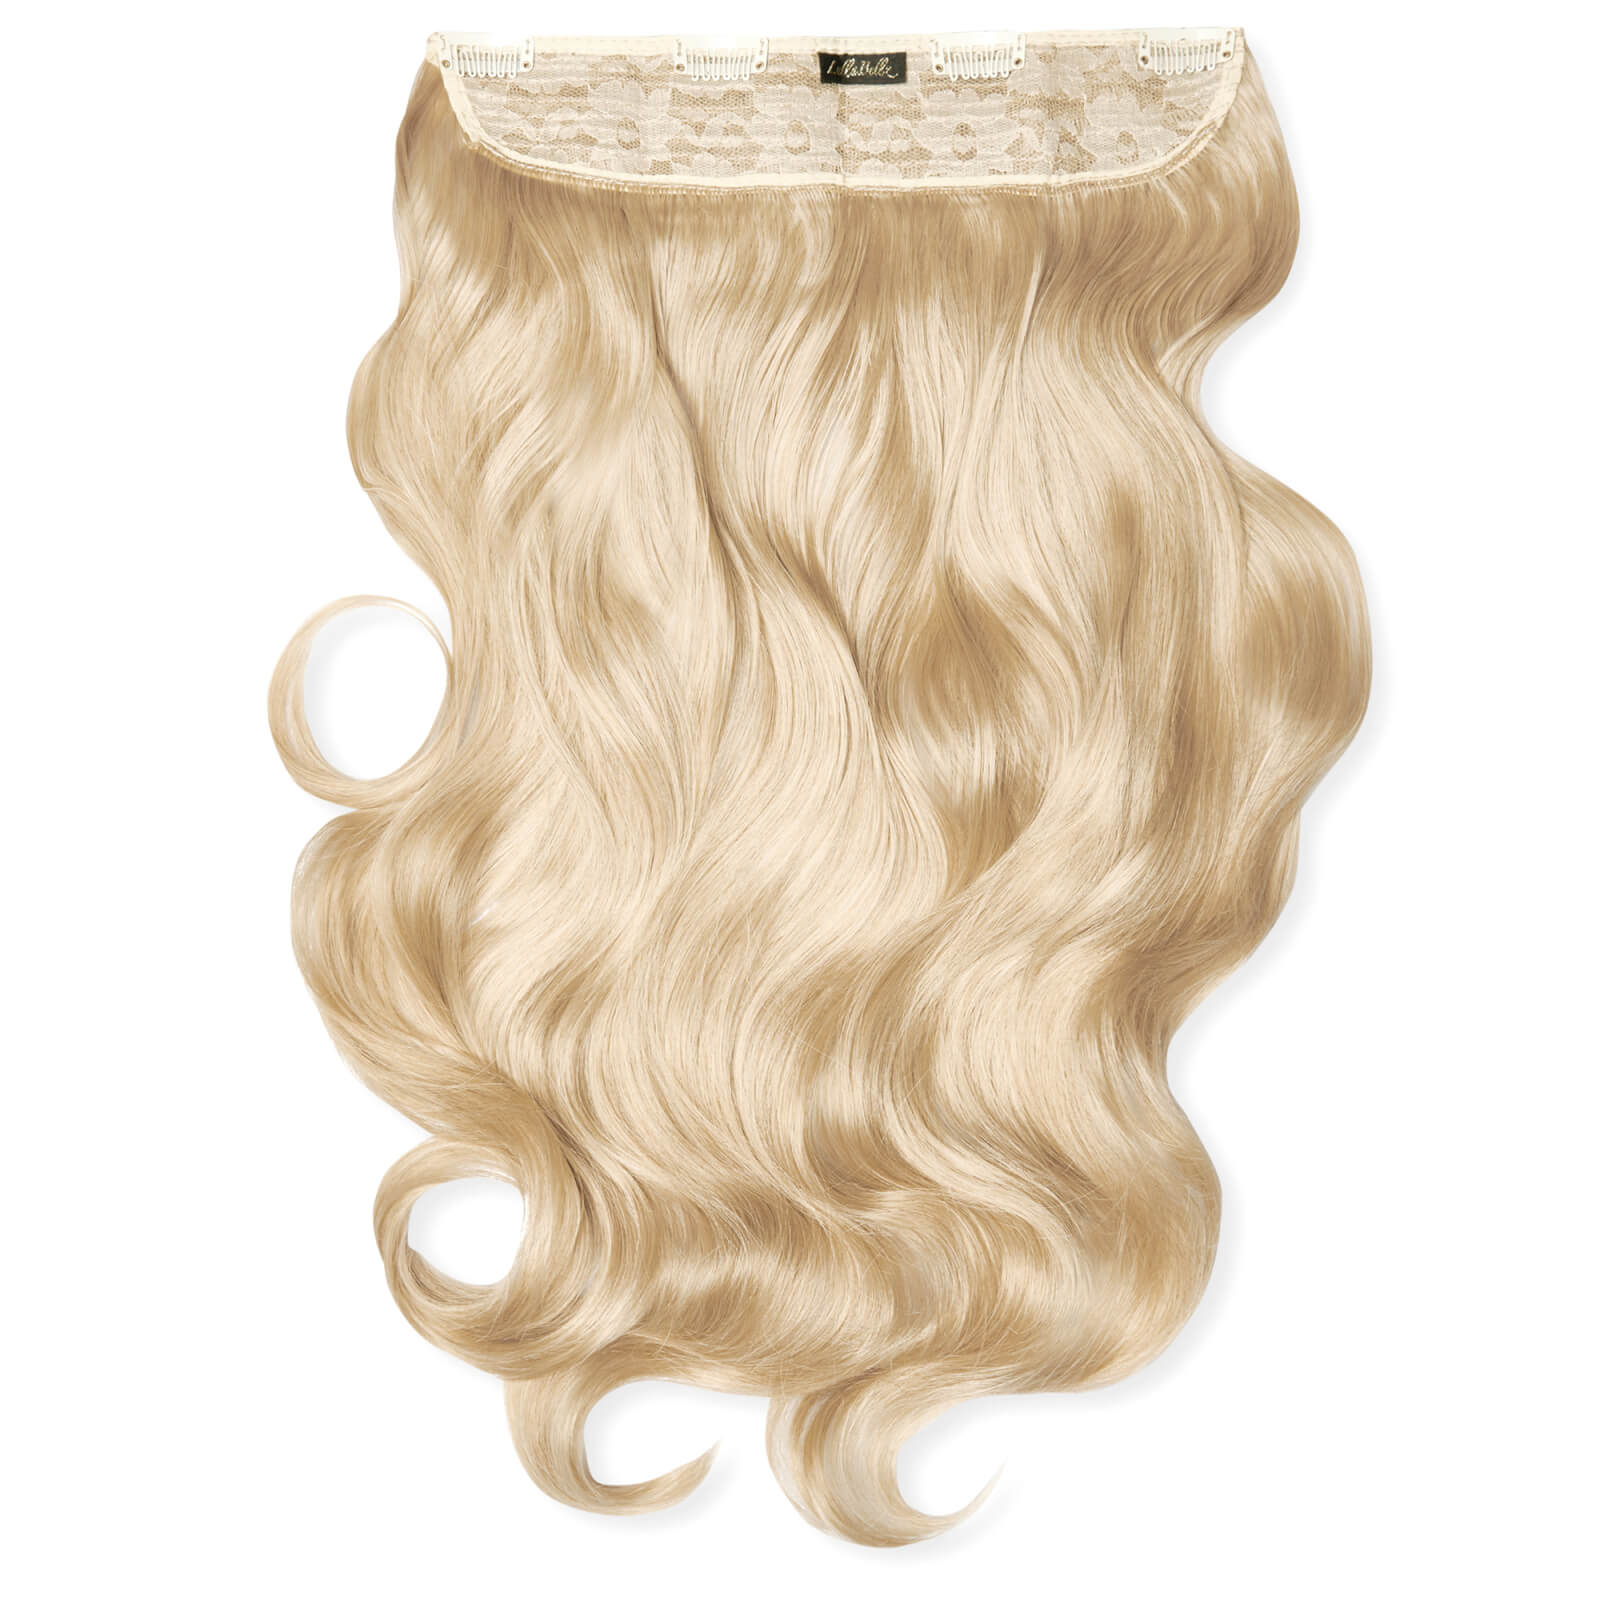 Image of LullaBellz Thick 20 1-Piece Curly Clip in Hair Extensions (Various Colours) - Light Blonde